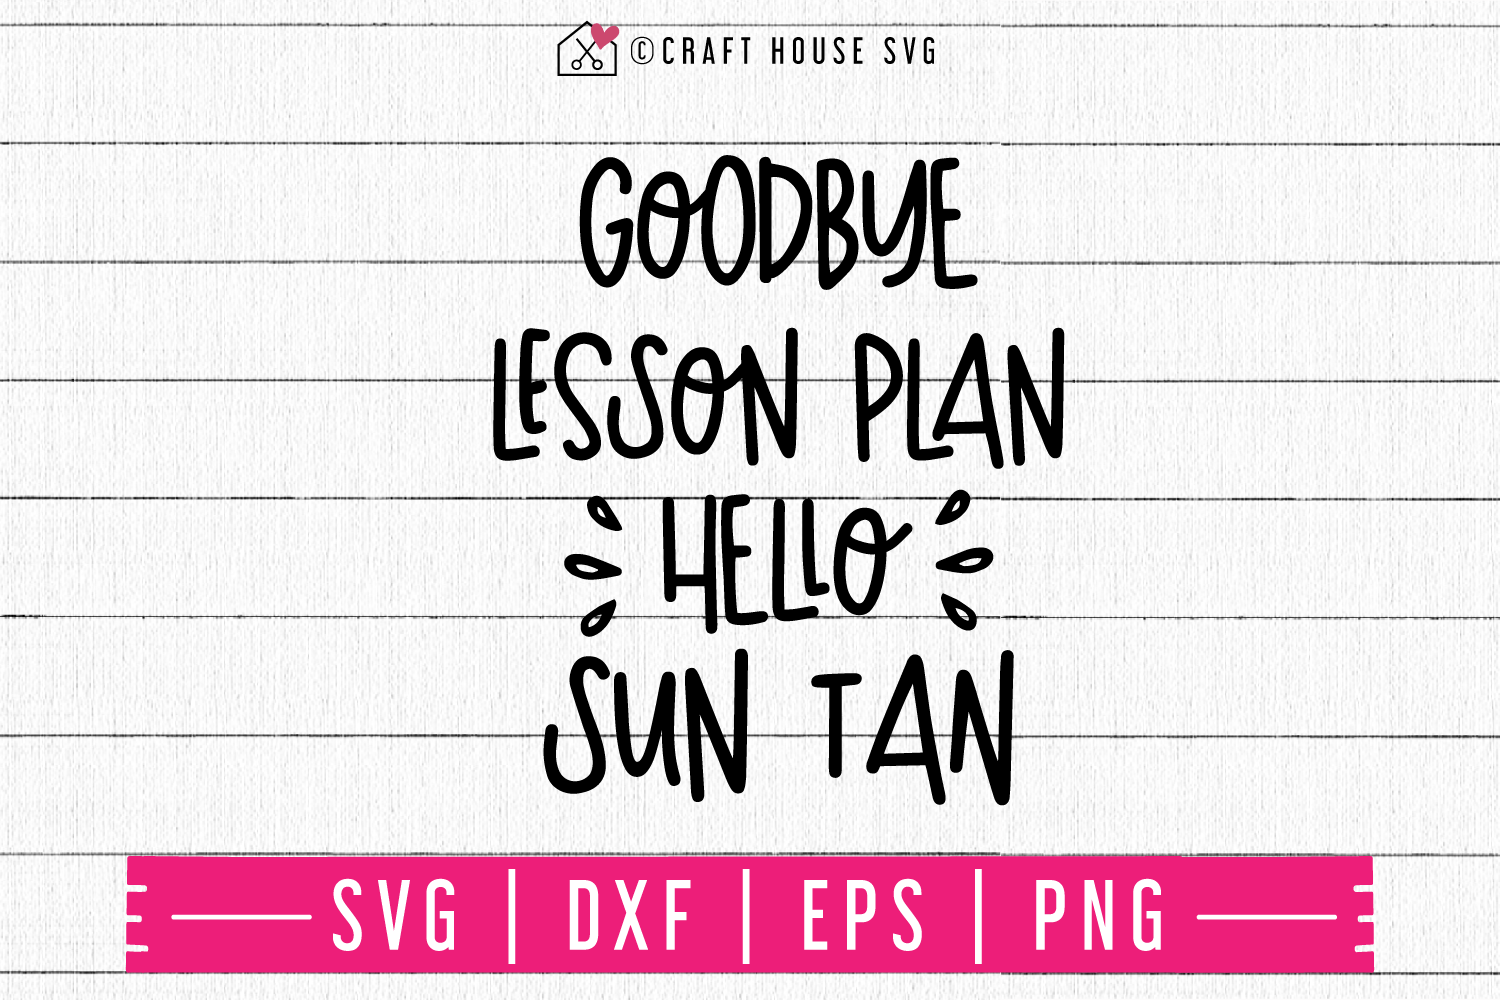 Goodbye lesson plan hello sun tan SVG | M48F | A Summer SVG cut file Craft House SVG - SVG files for Cricut and Silhouette